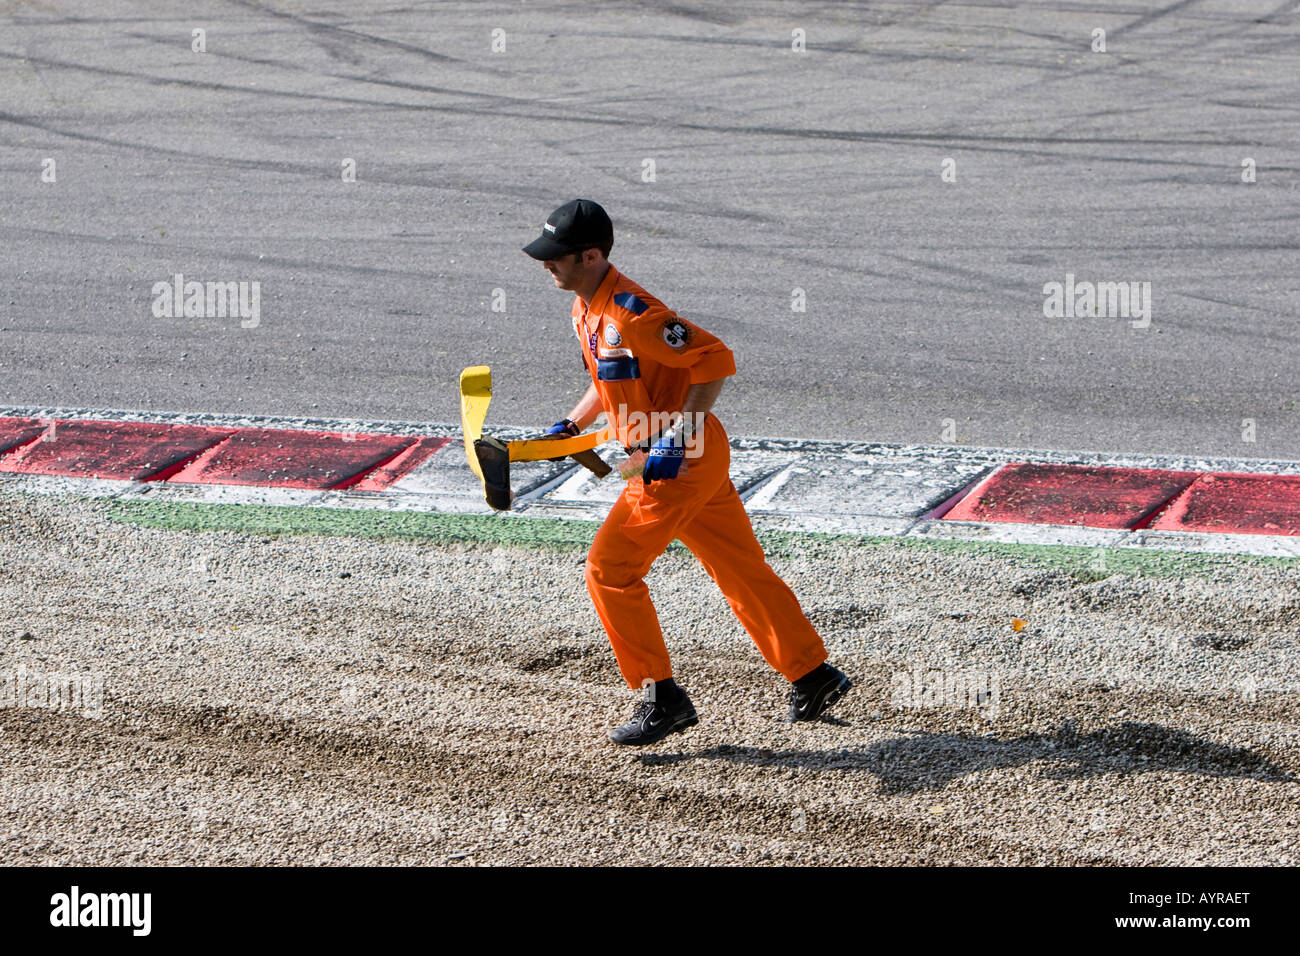 Track marshal aka course worker at work, racetrack Stock Photo